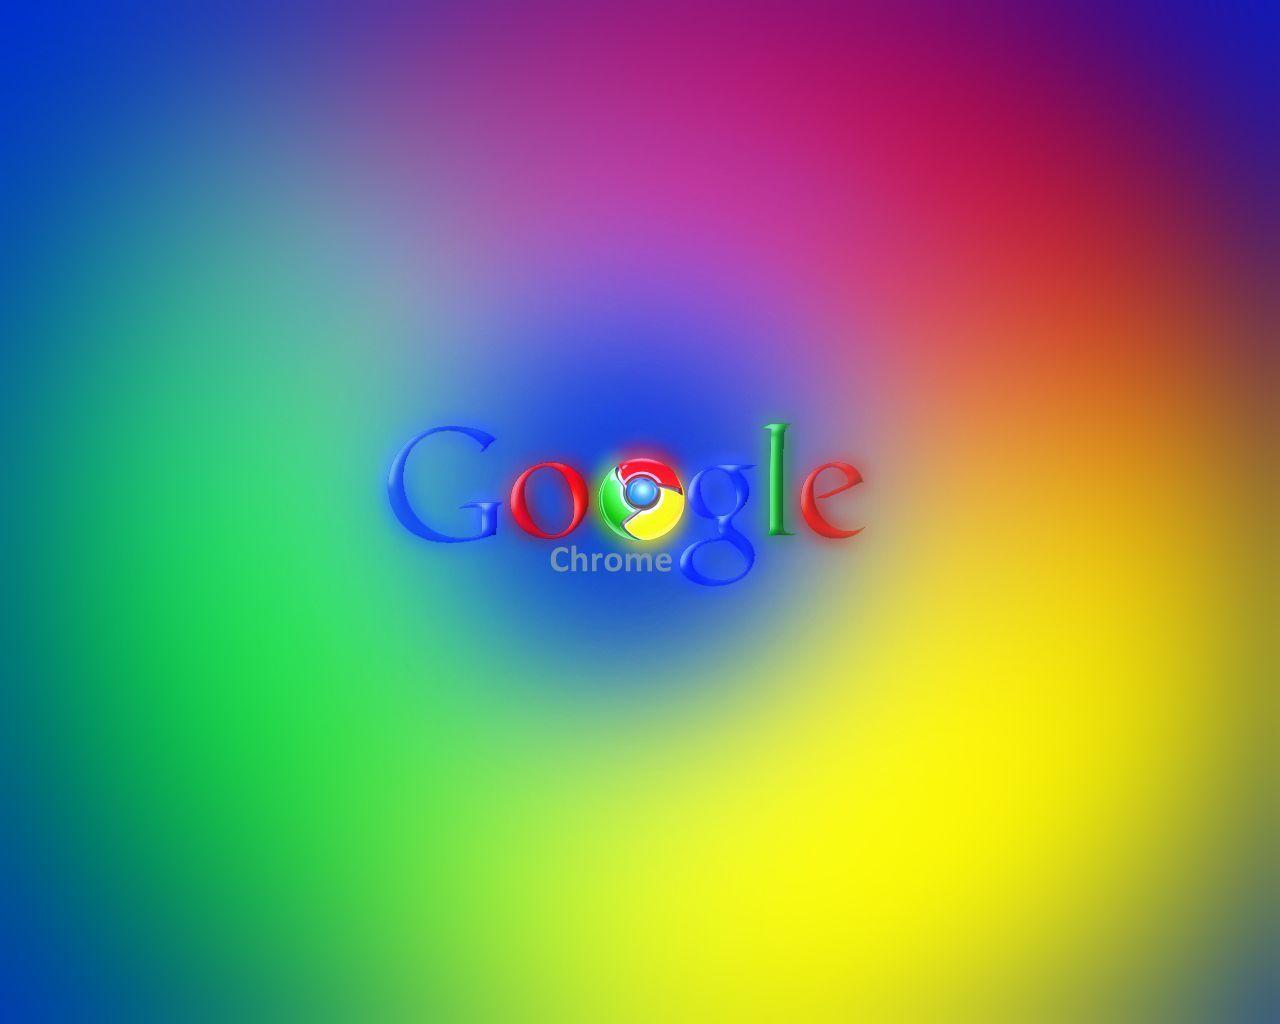 Google Chrome Wallpaper Photo 26989 HD Picture. Top Background Free